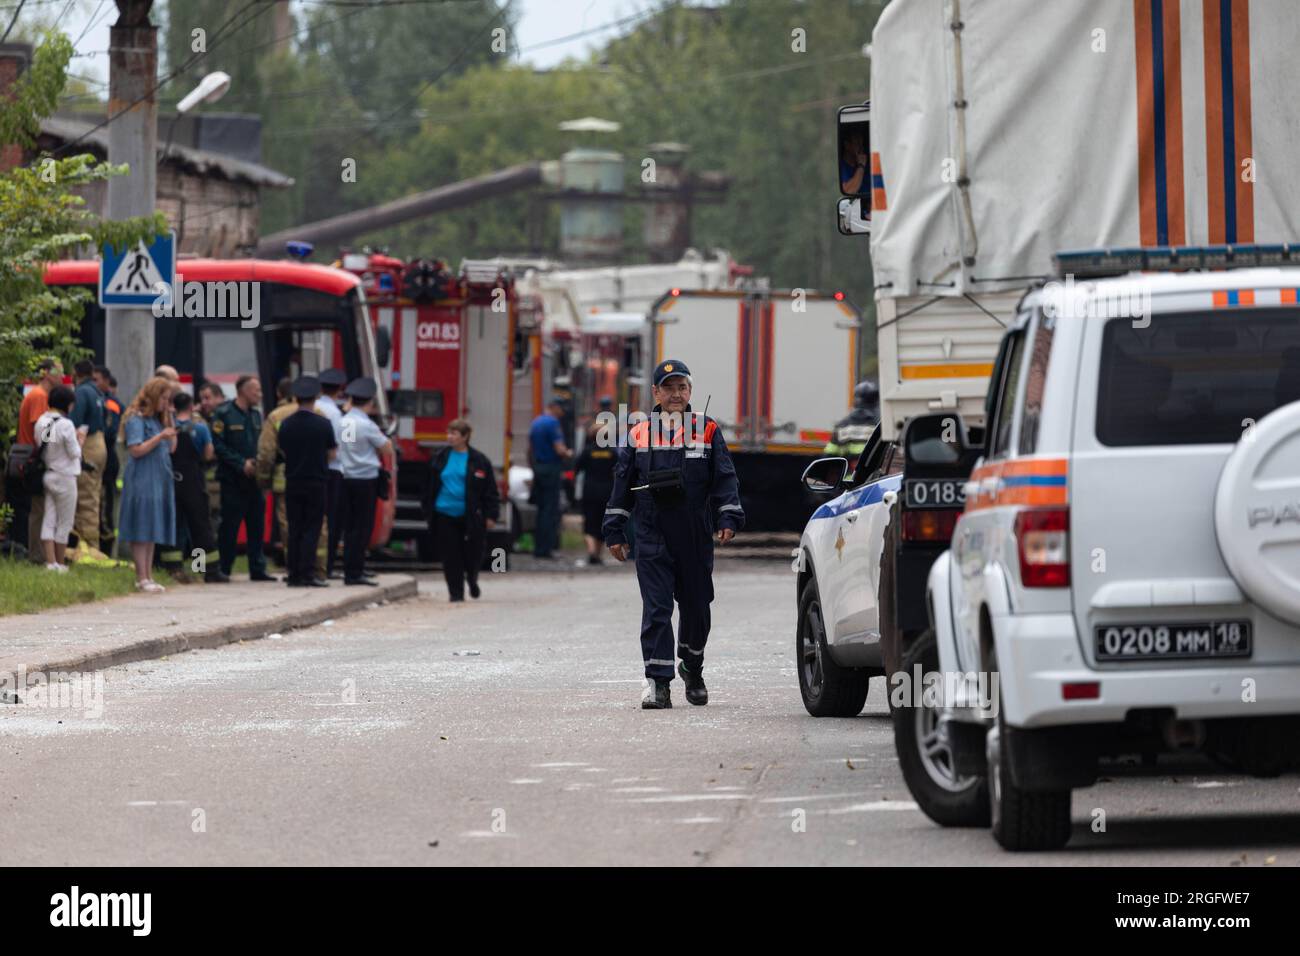 (230809) -- MOSCOW, Aug. 9, 2023 (Xinhua) -- Rescuers and vehicles are seen at the blast site of a plant in Moscow region, Russia, Aug. 9, 2023. Forty-three people have been injured so far in a blast at an optical-mechanical plant in the city of Sergiev Posad in the Moscow region on Wednesday, local authorities said. The explosion happened on Wednesday morning at around 10:40 a.m. local time (0740 GMT) at a pyrotechnics warehouse, which was being rented out on the optical-mechanical plant's territory by a private company, said Governor of the Moscow Region Andrei Vorobiev in a Telegram post. Stock Photo